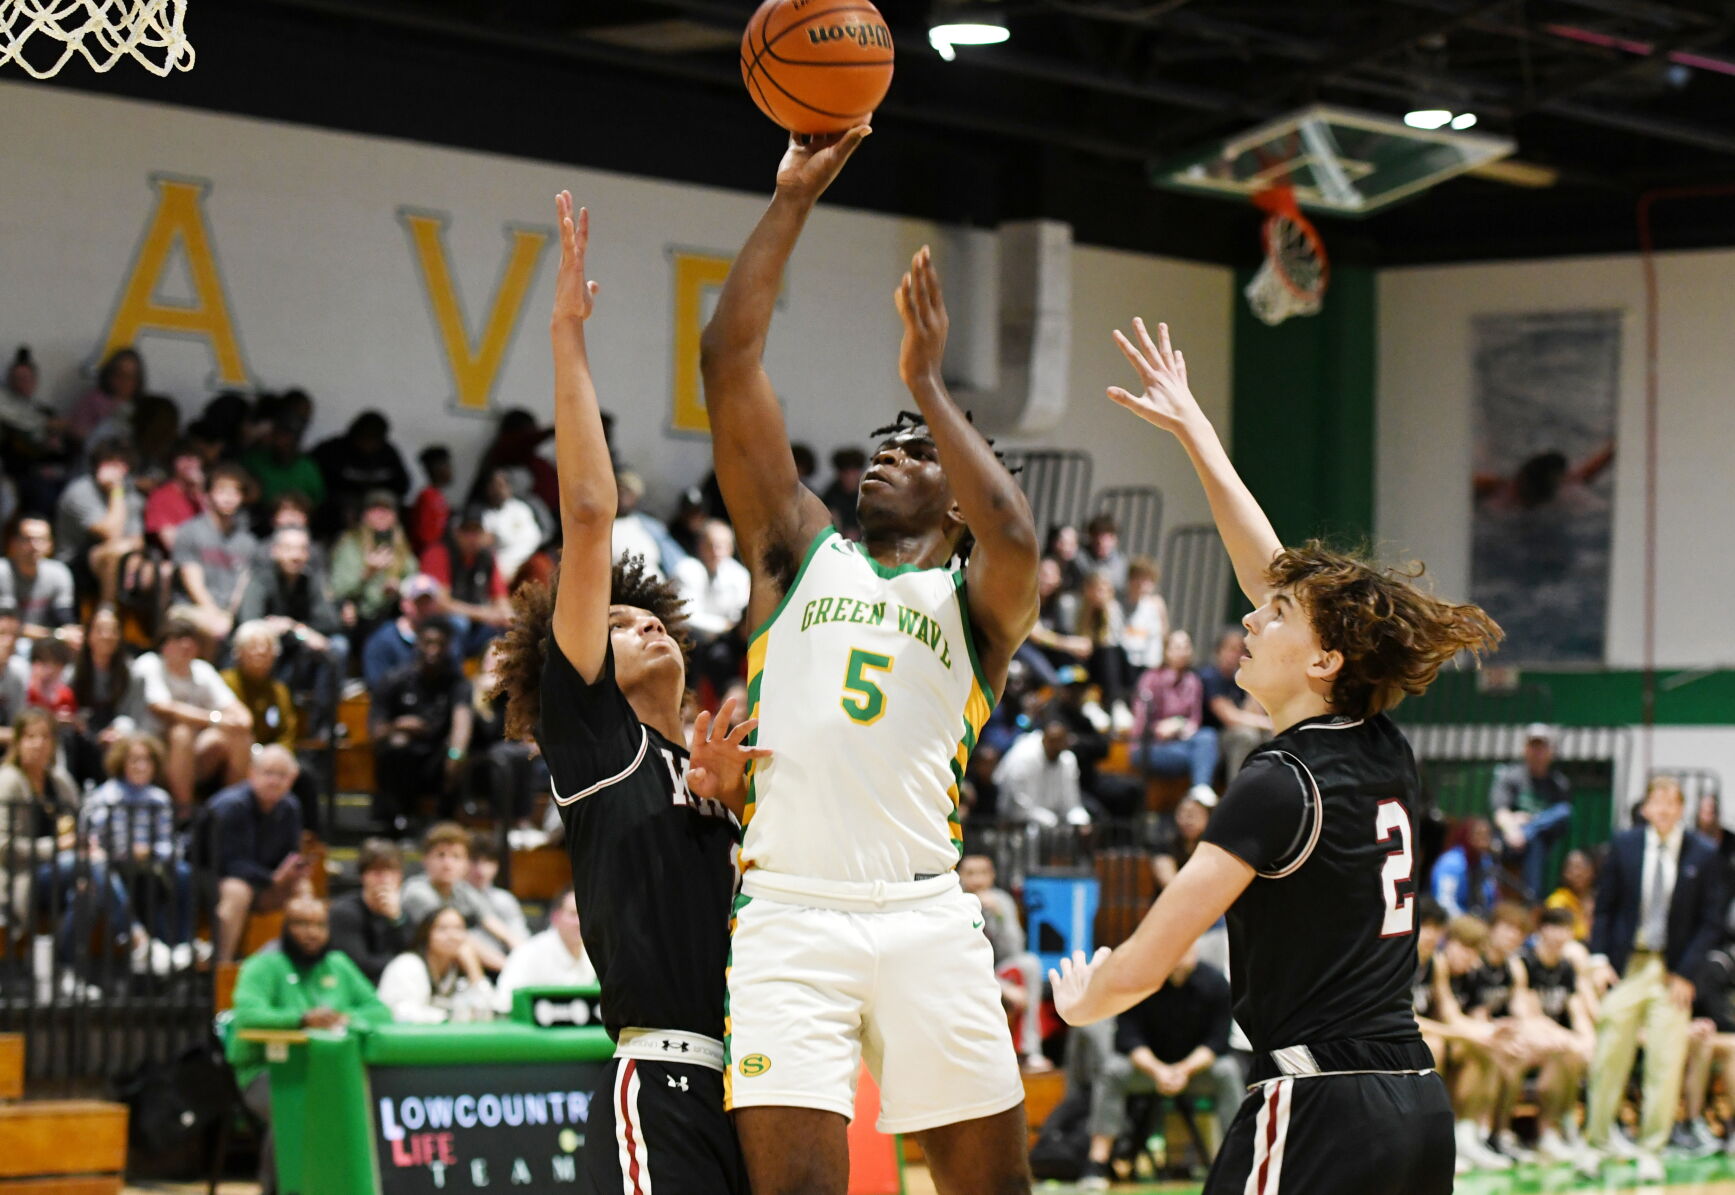 Summerville High School Boys Basketball Reaches Lower State Finals for the First Time Since 2007-08 Season, Led by Yannick Smith with 23 Points